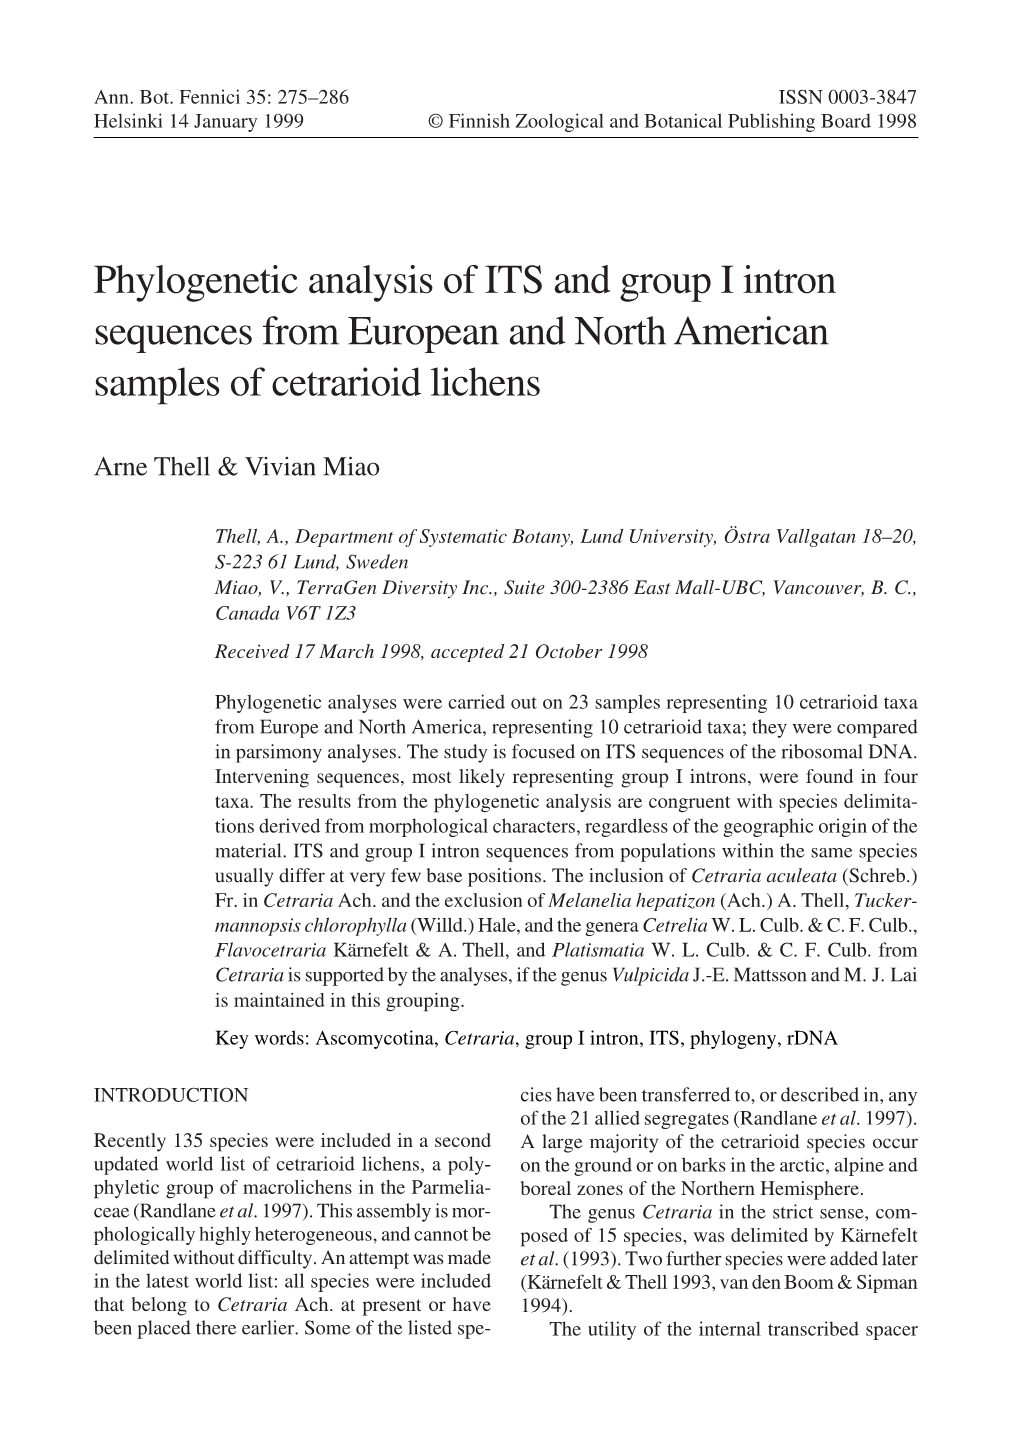 Phylogenetic Analysis of ITS and Group I Intron Sequences from European and North American Samples of Cetrarioid Lichens